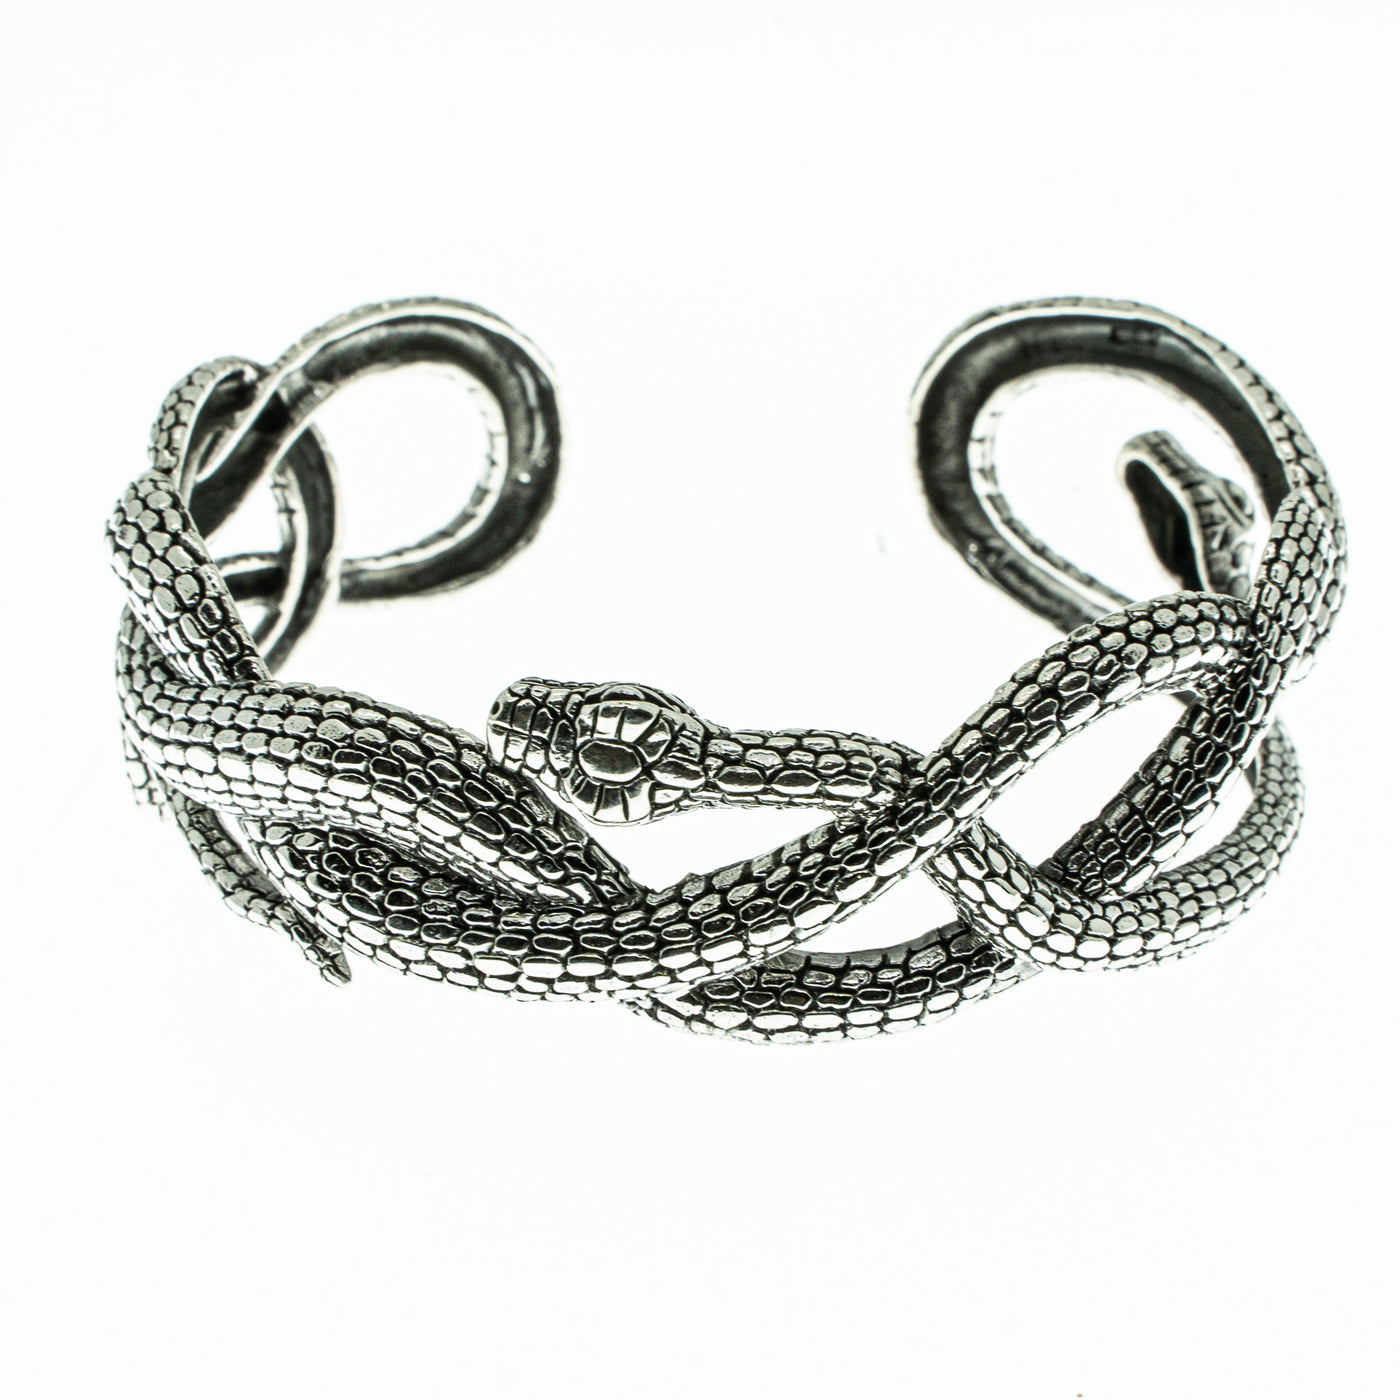 Entwined Snake torc/bangle .925 sterling silver